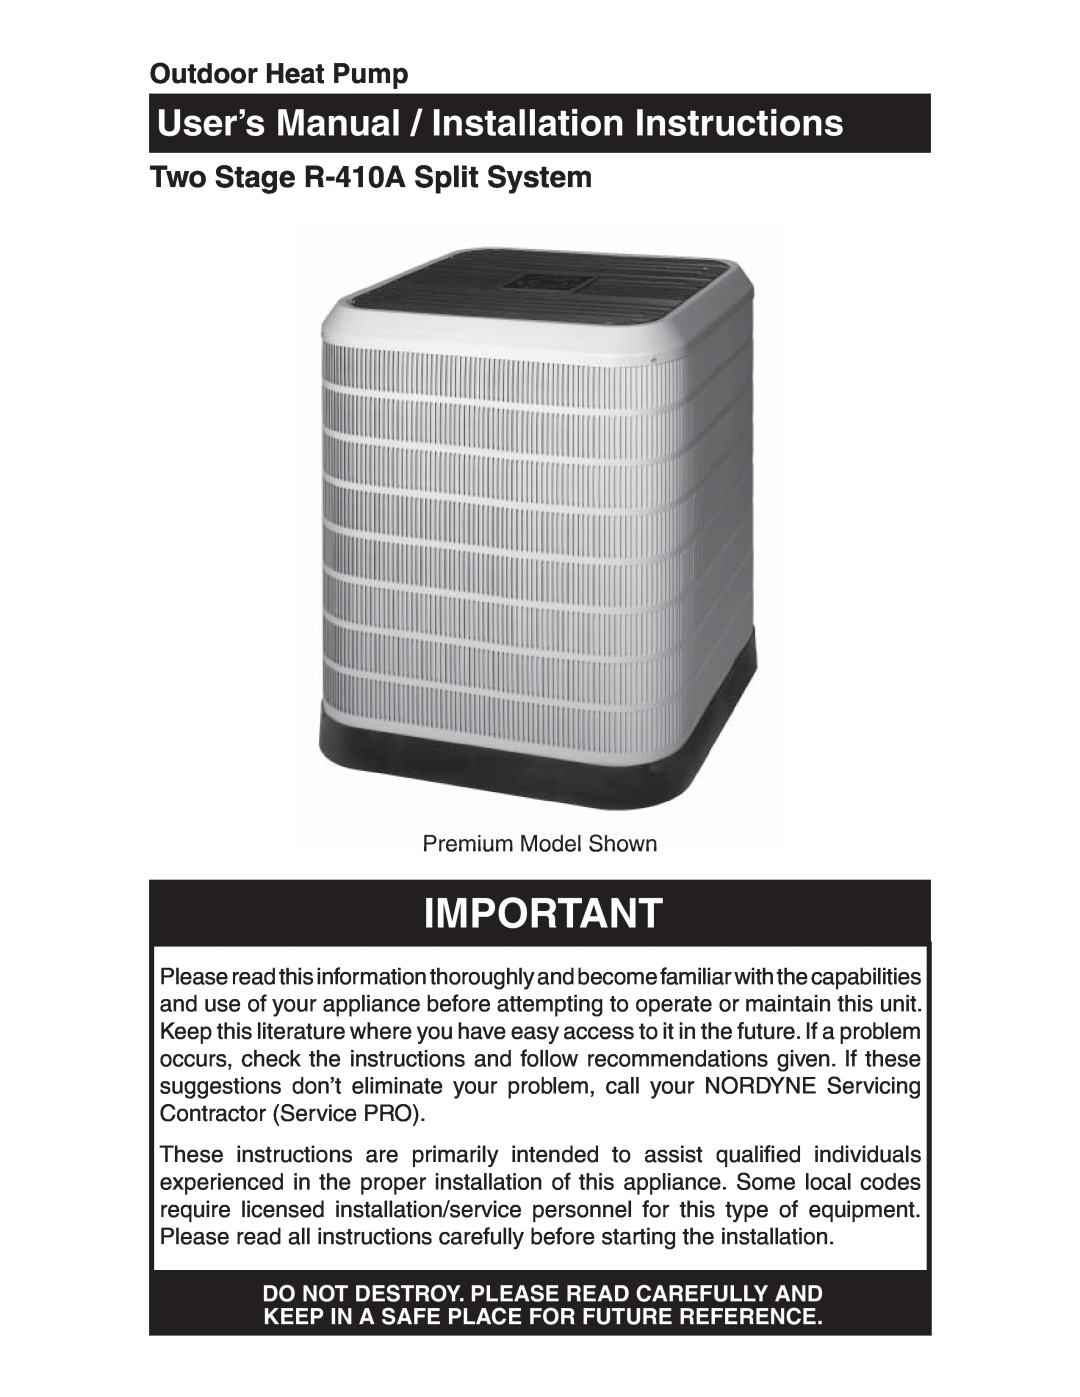 Nordyne user manual Outdoor Heat Pump, Do Not Destroy. Please Read Carefully And, Two Stage R-410ASplit System 